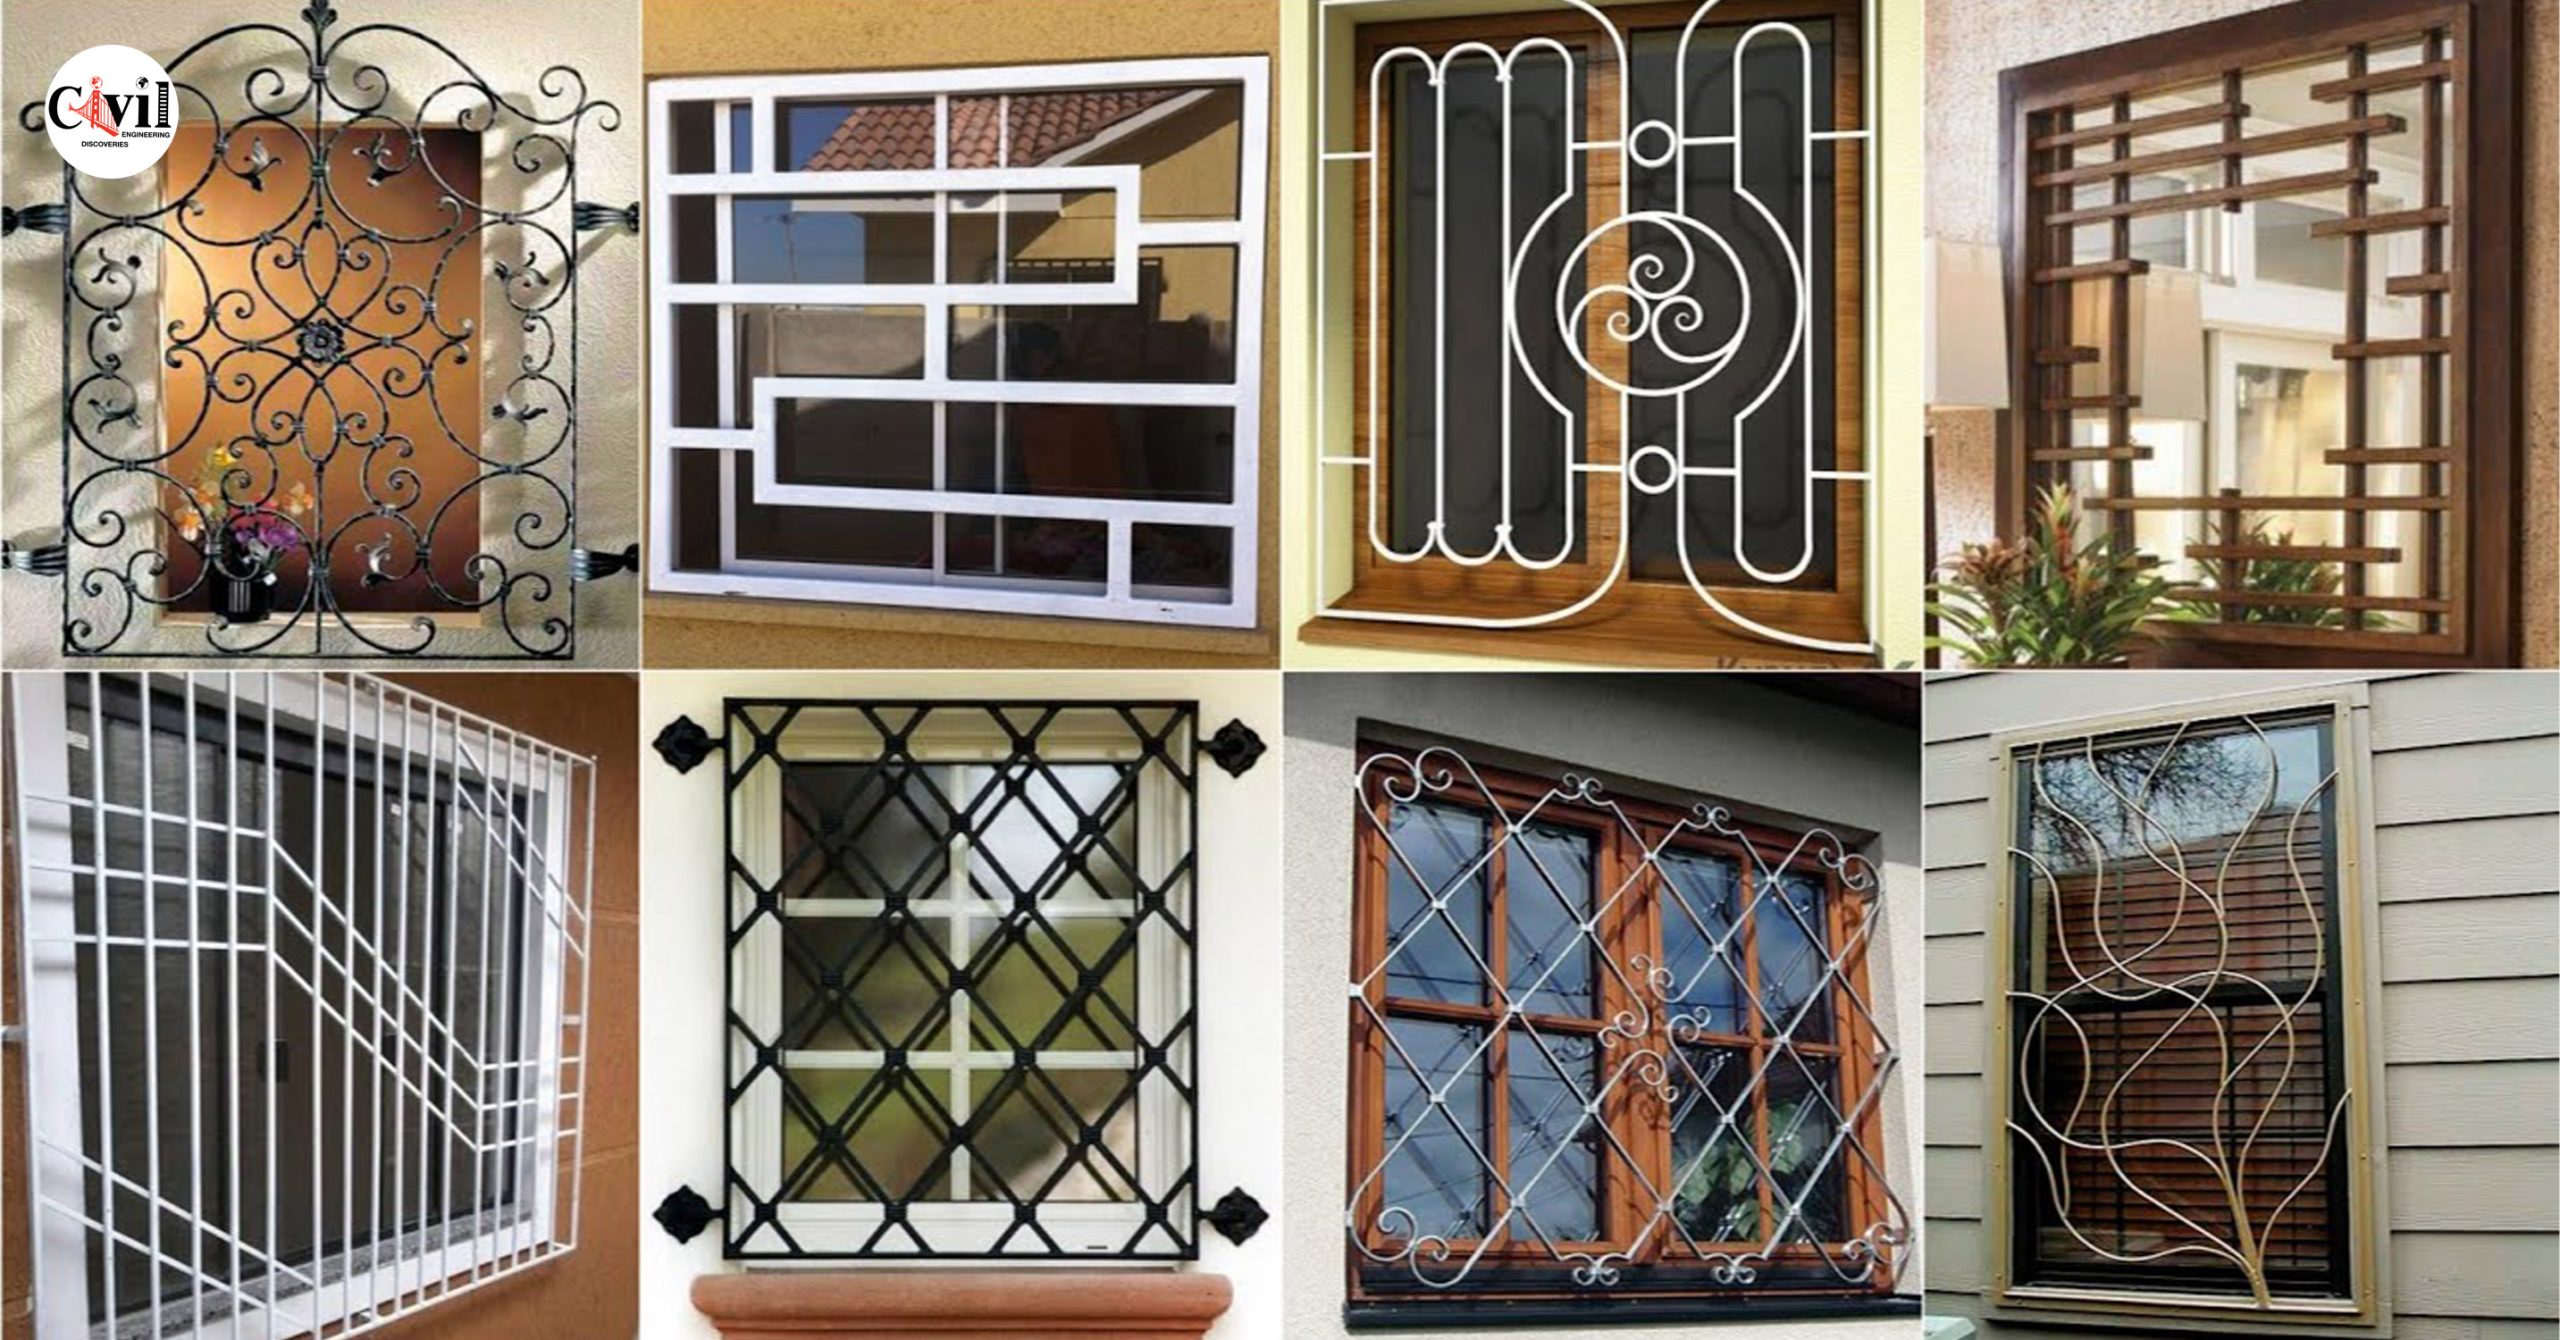 https://engineeringdiscoveries.com/wp-content/uploads/2022/09/Elegant-Window-Grill-Designs-Ideas-for-Your-Homes-scaled.jpg